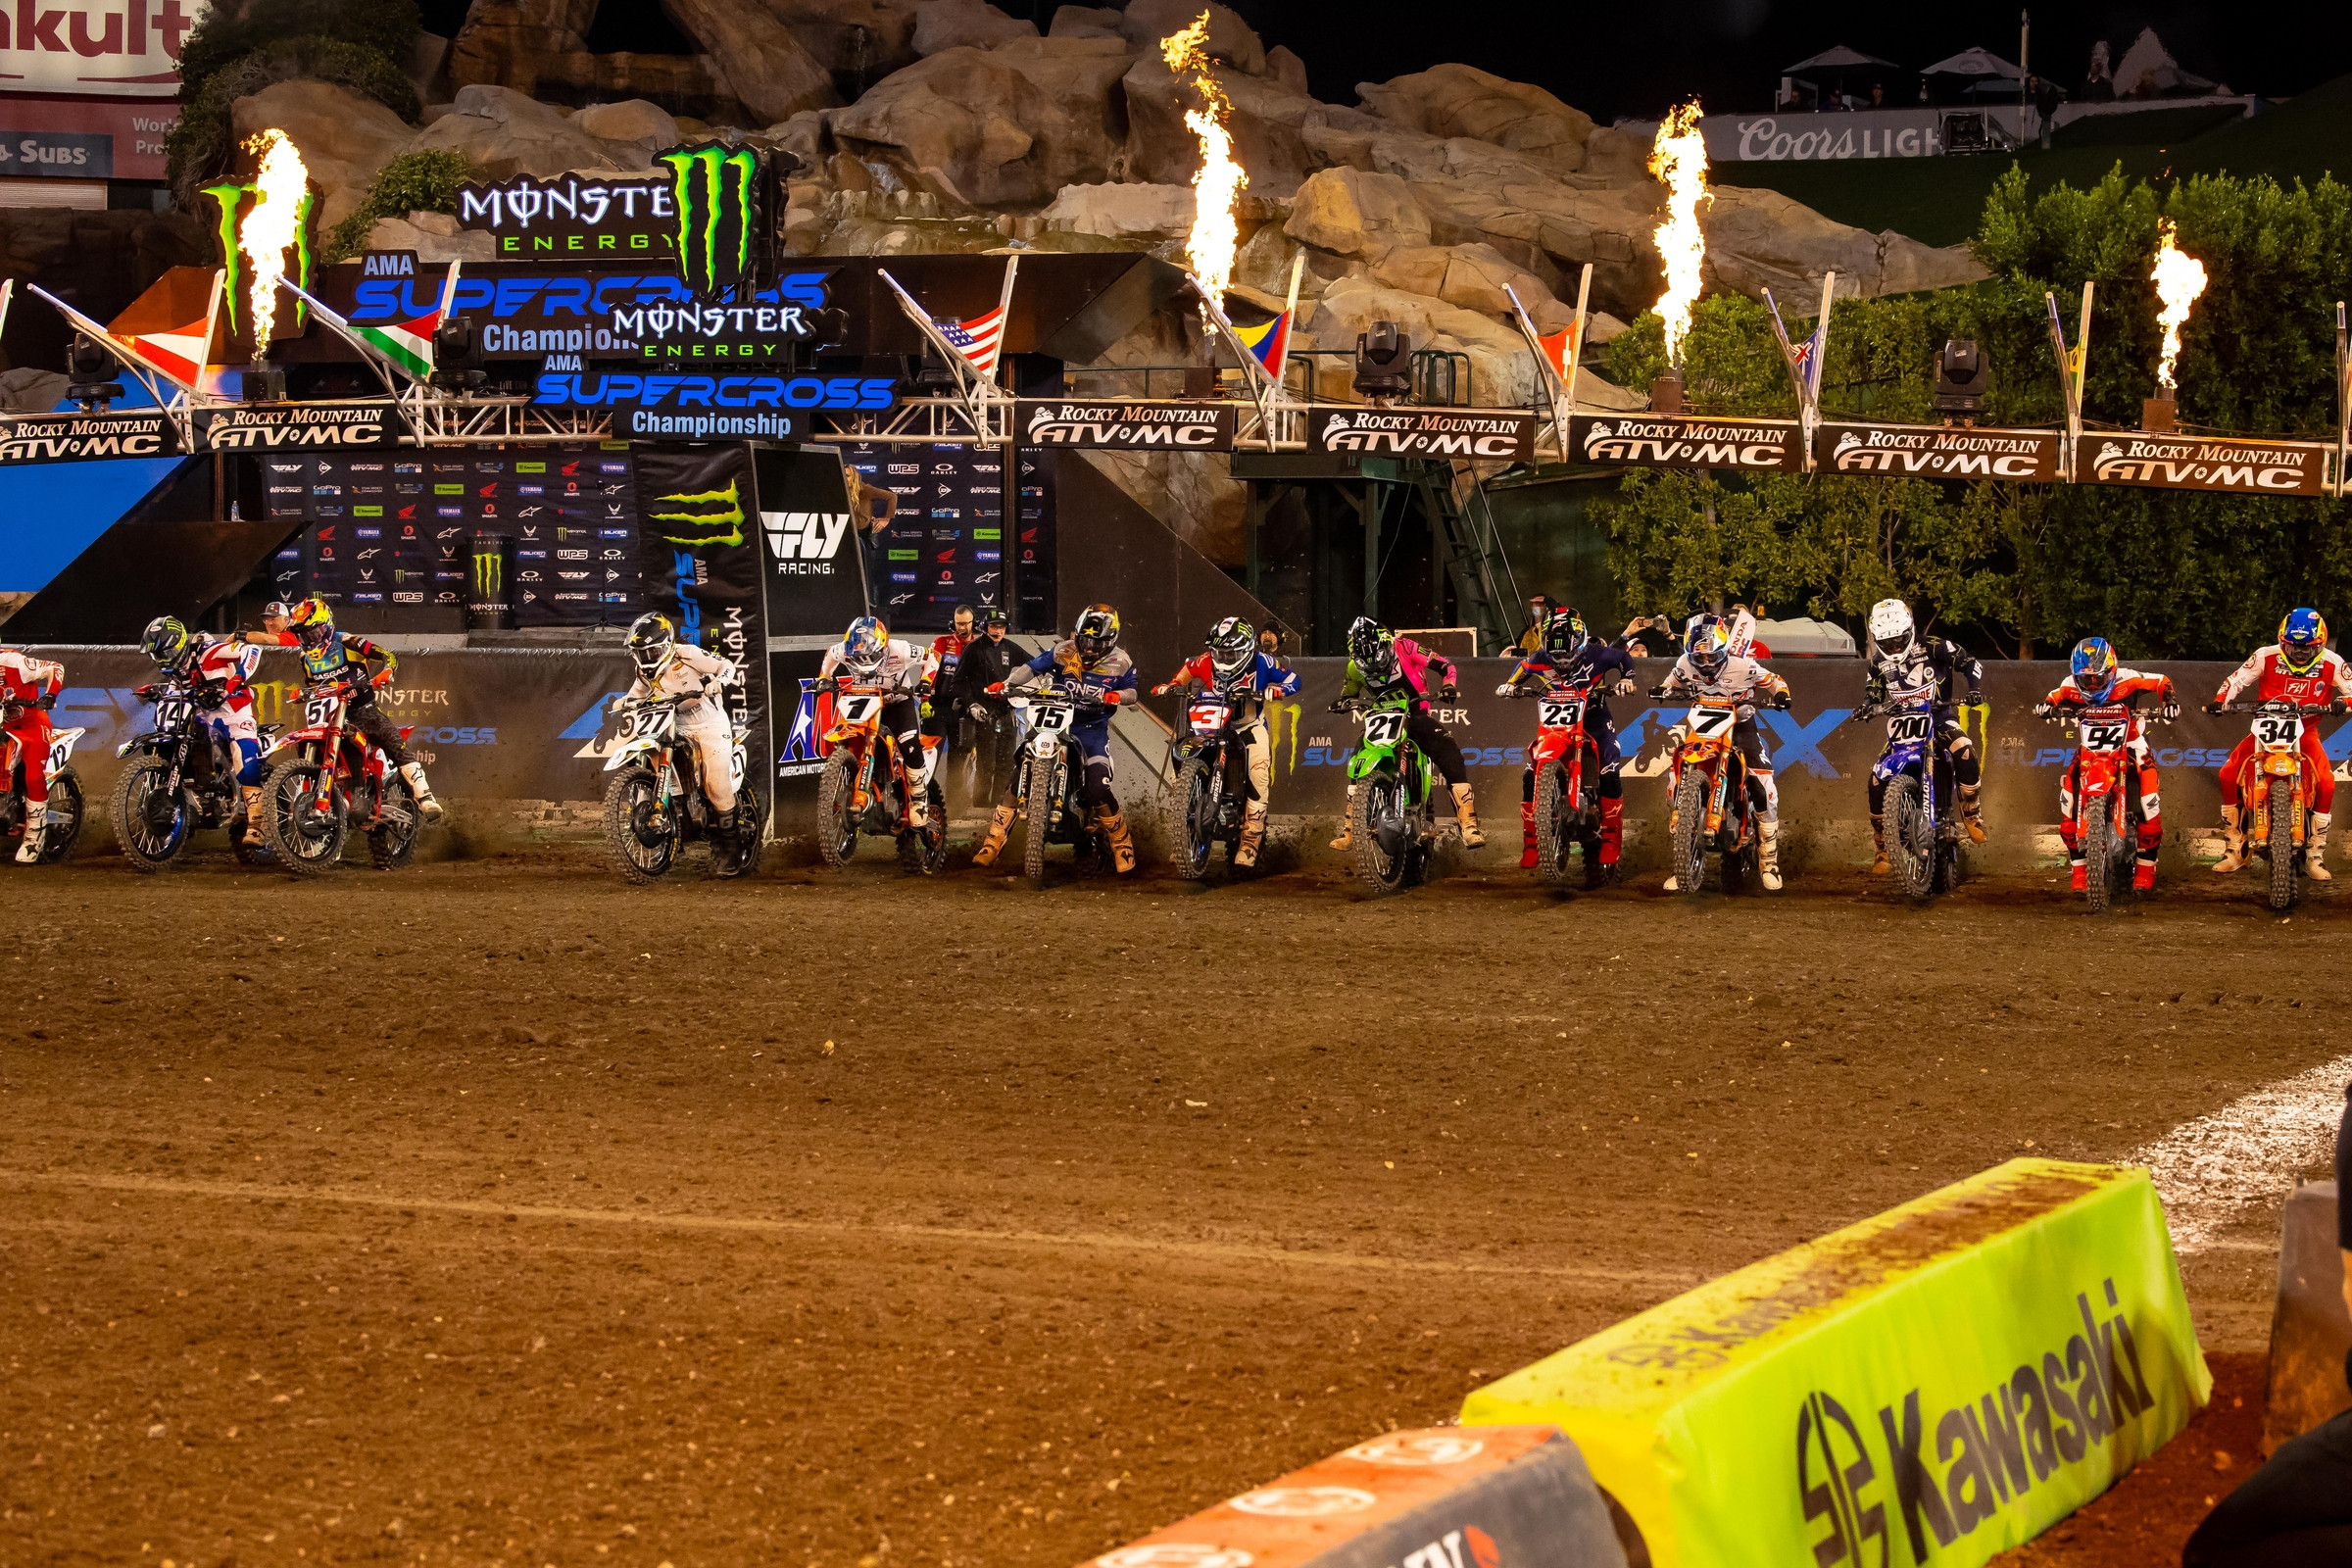 Race Report from the 2022 Anaheim 2 Supercross